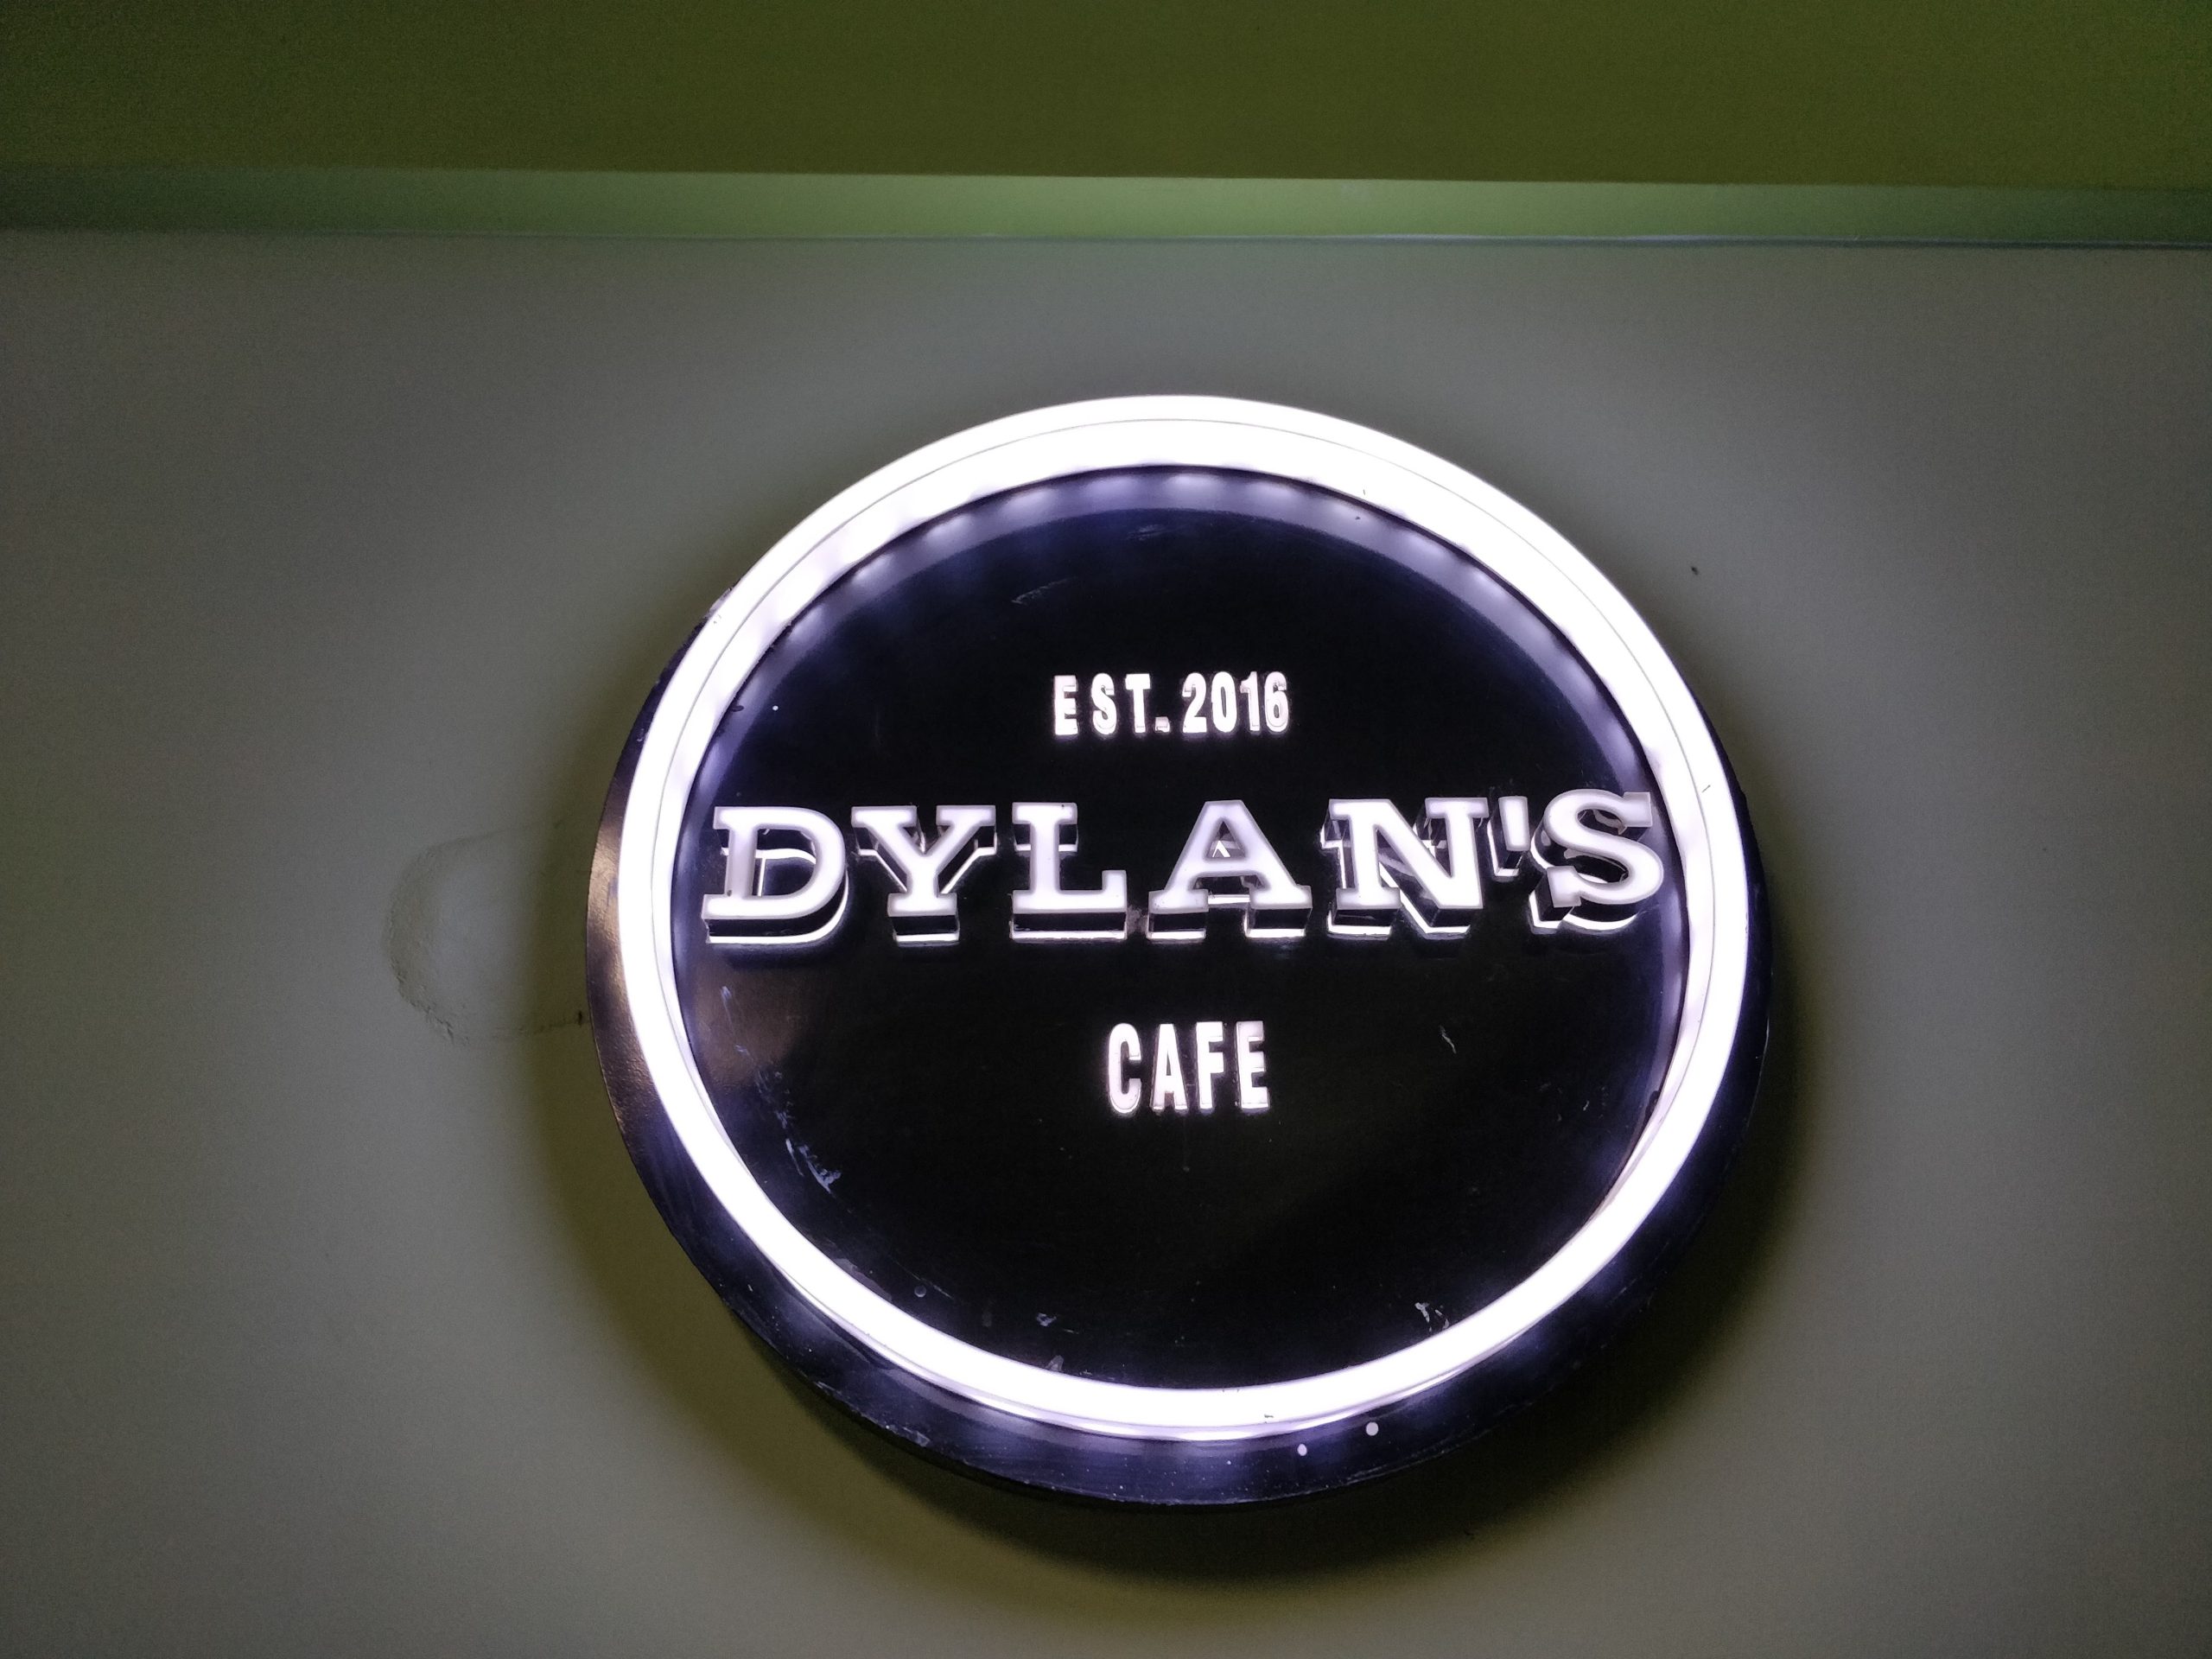 Wall decor using old vinyl records - Picture of Dylan's Cafe